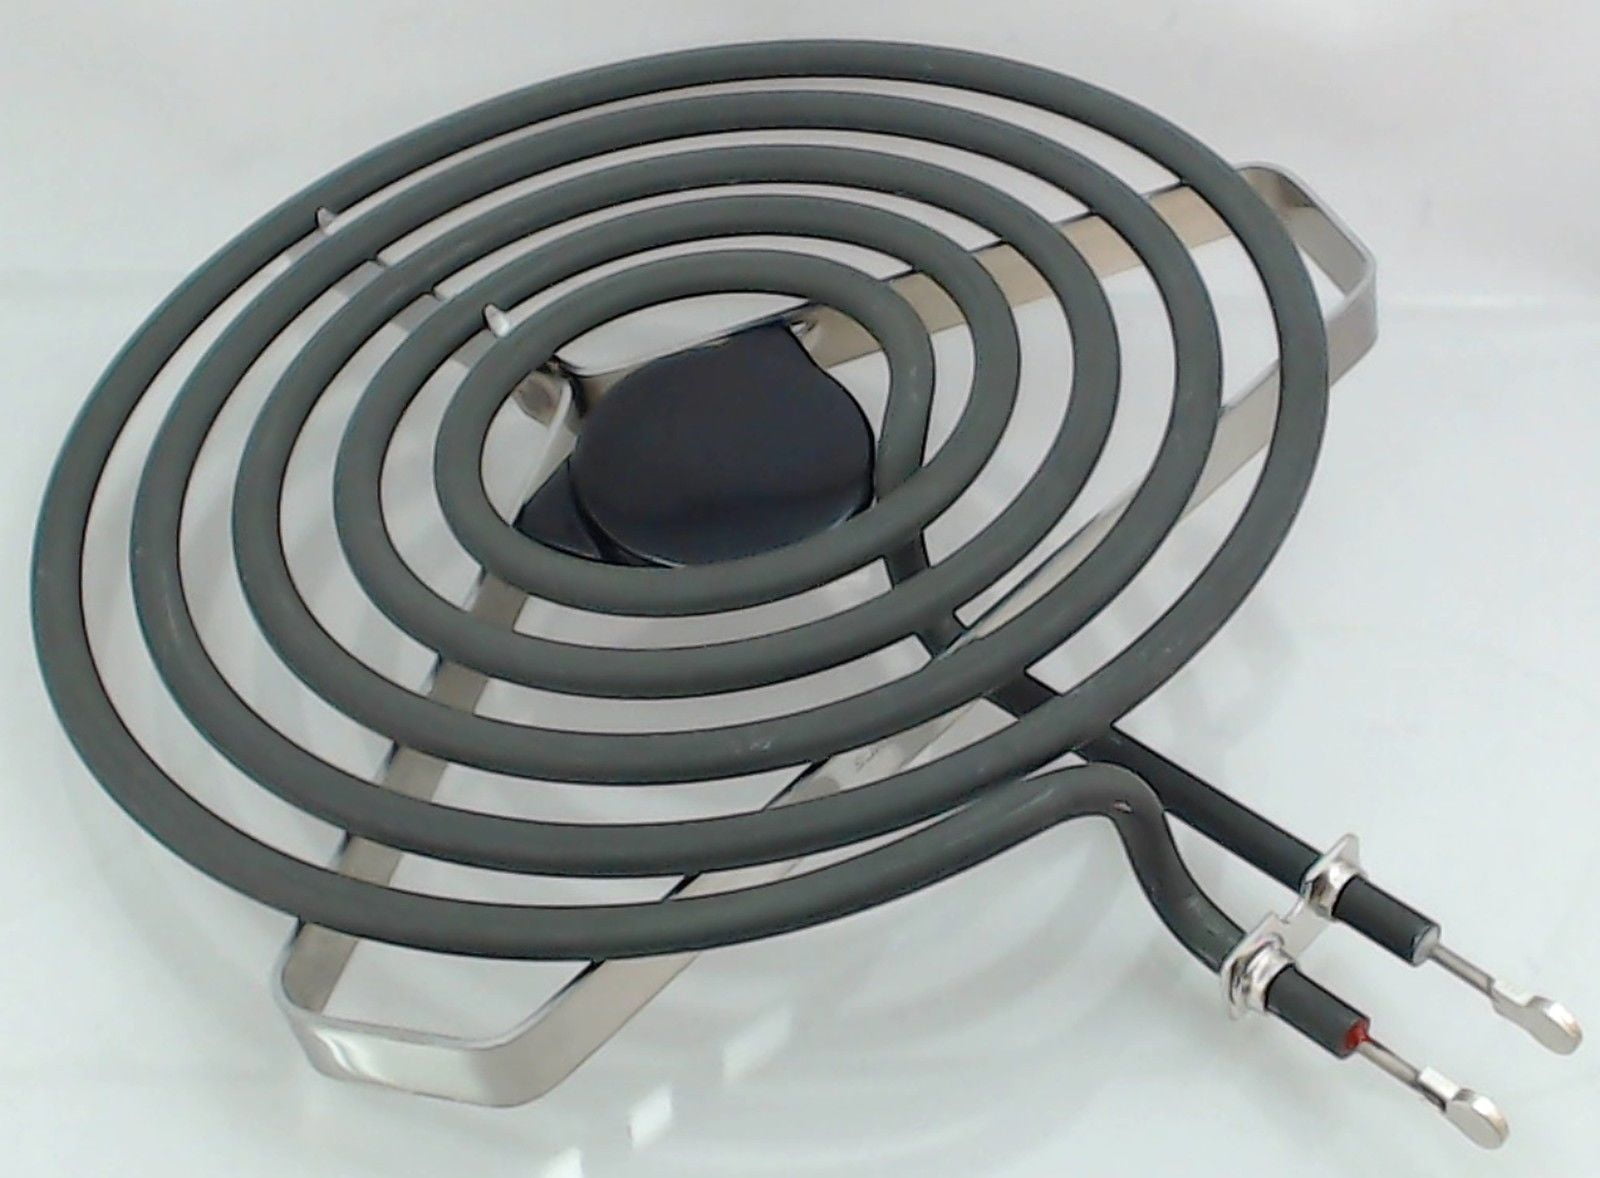 Frigidaire Kenmore Range Cooktop Stove 6" Small Surface Burner Element 318372211 